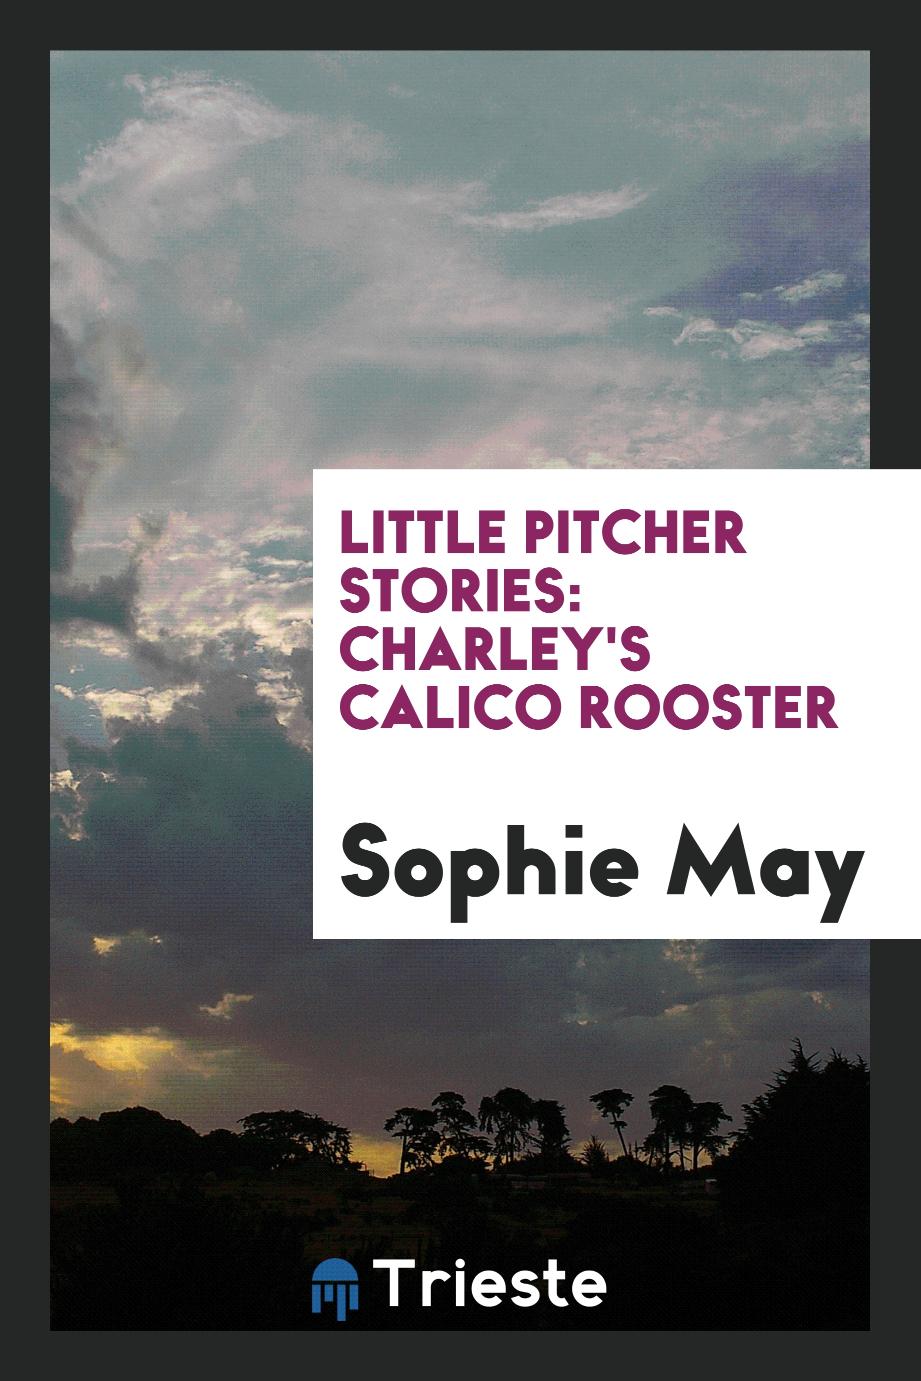 Little Pitcher Stories: Charley's Calico Rooster